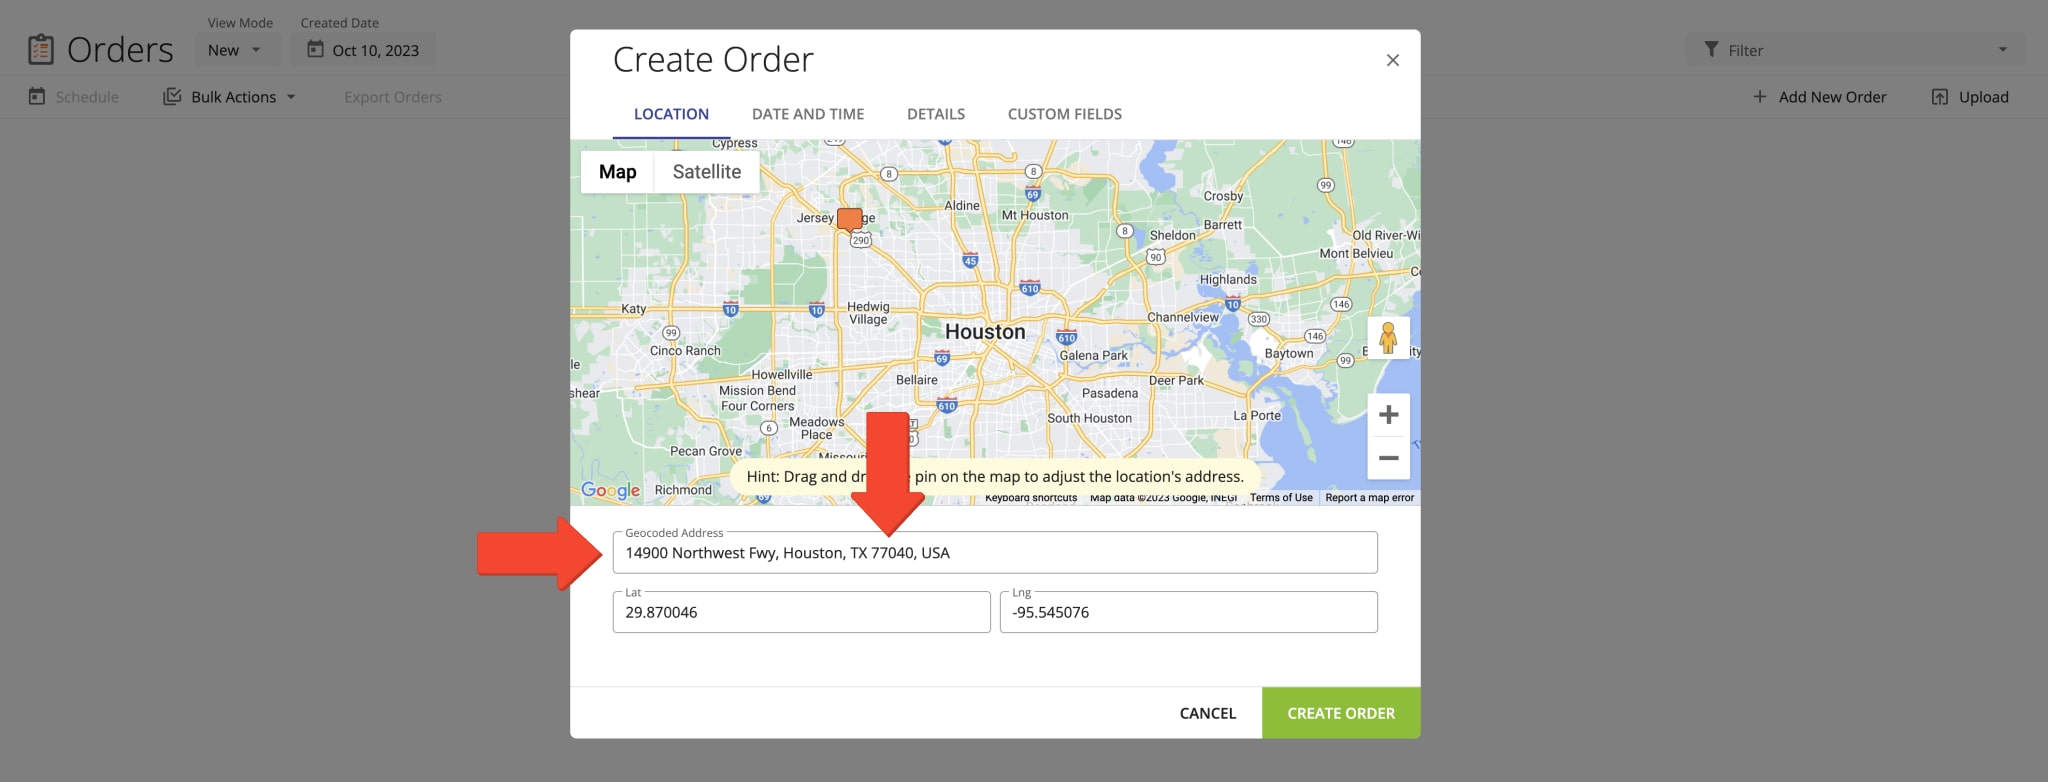 Orders in Route4Me's Delivery Management System have a geocoded address with a valid address ZIP code.